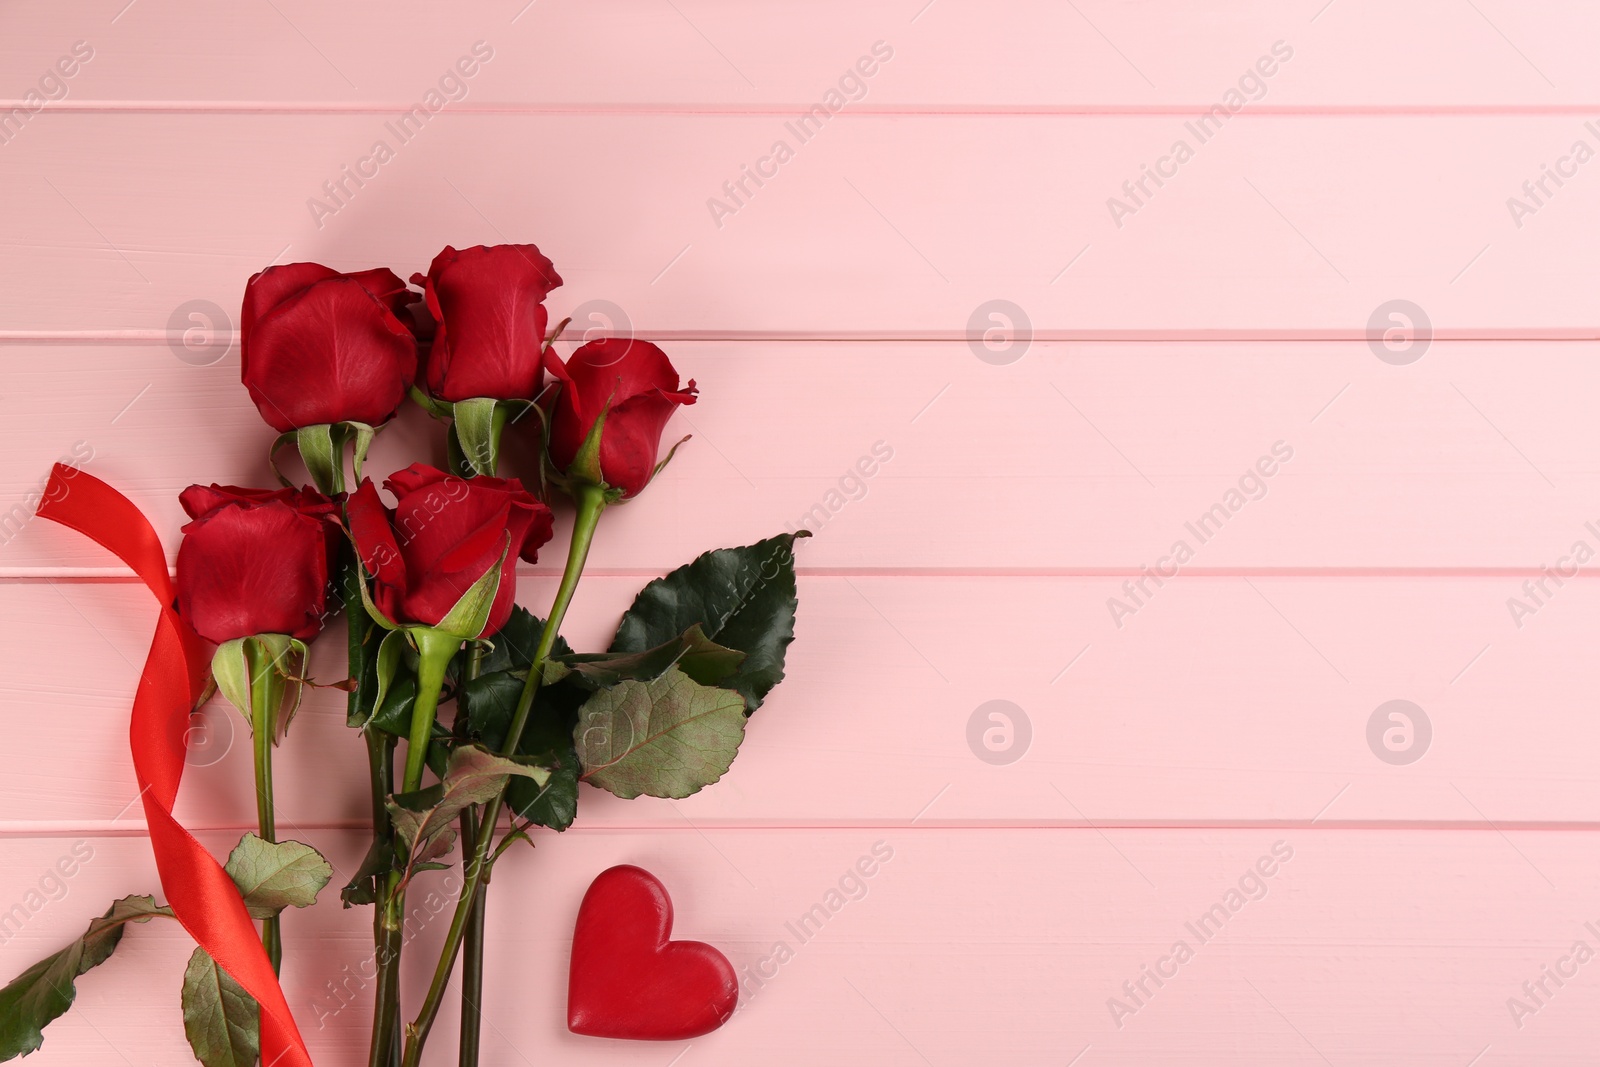 Photo of Beautiful red roses and decorative heart on pink wooden background, flat lay with space for text. Valentine's Day celebration